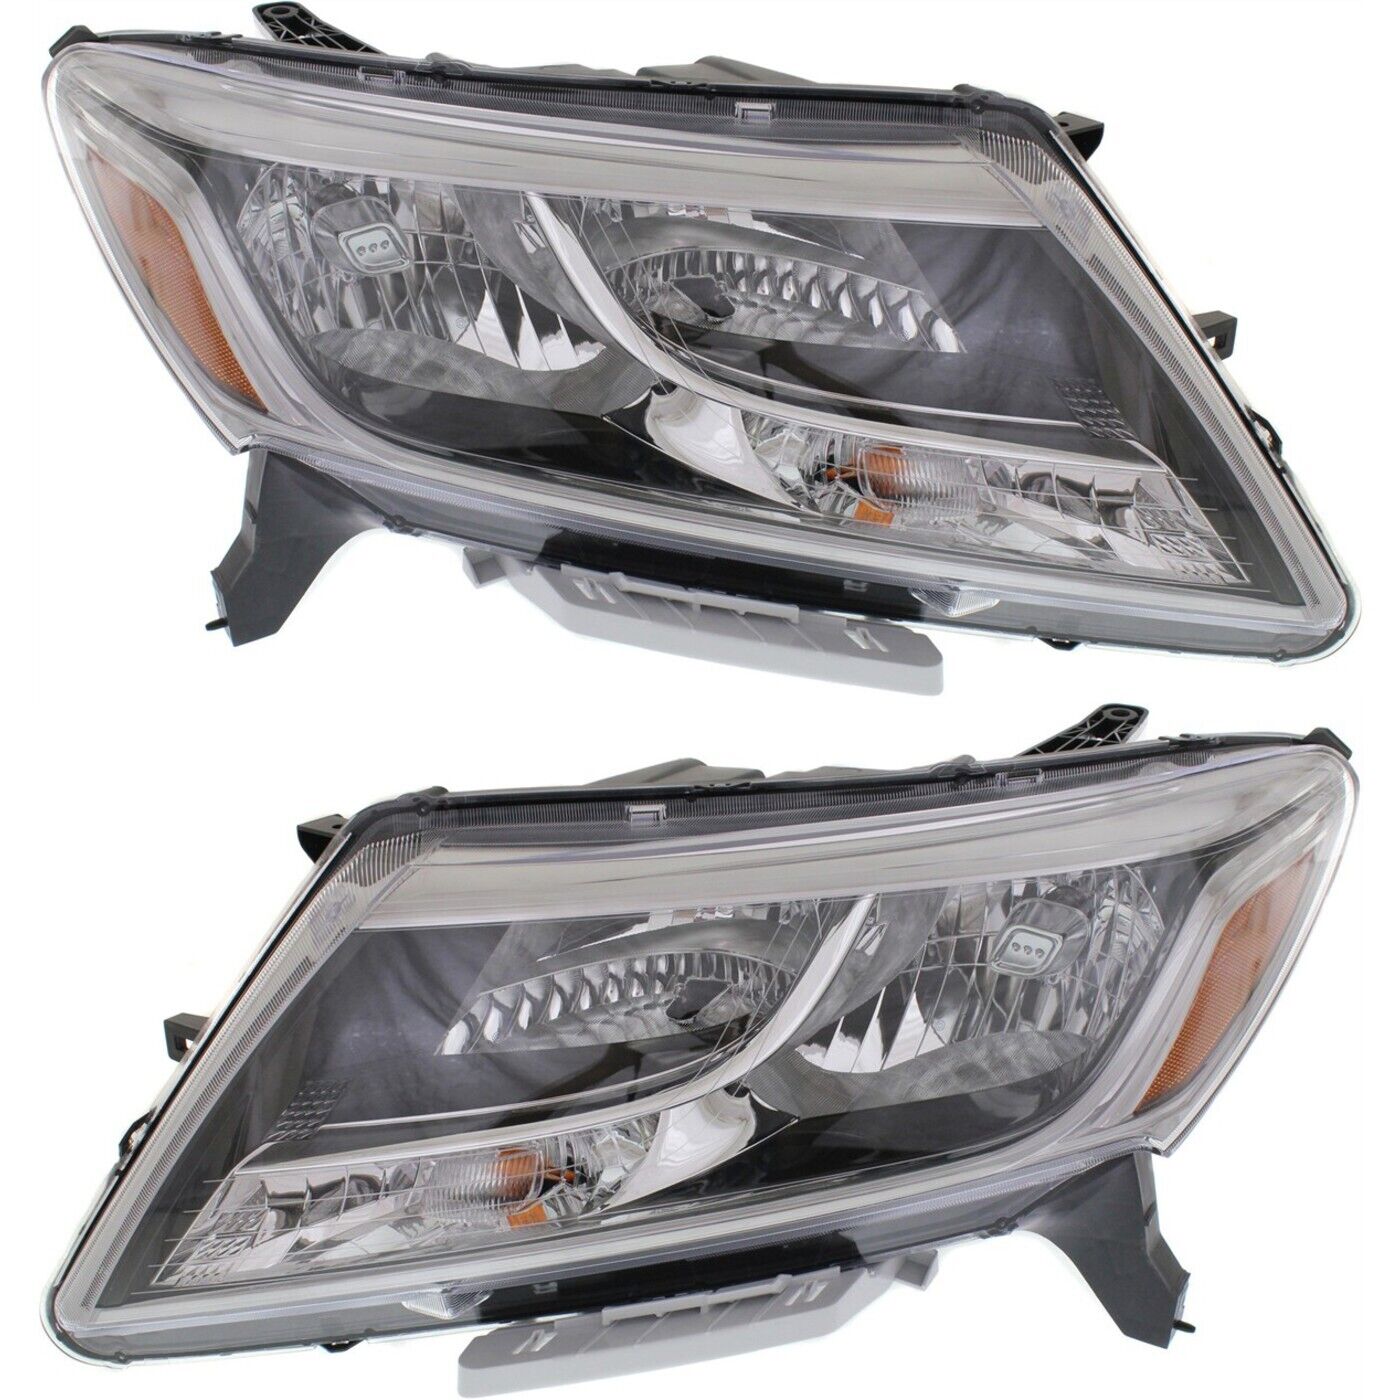 Headlight Assembly Set For 2013-2016 Nissan Pathfinder Left and Right With Bulb